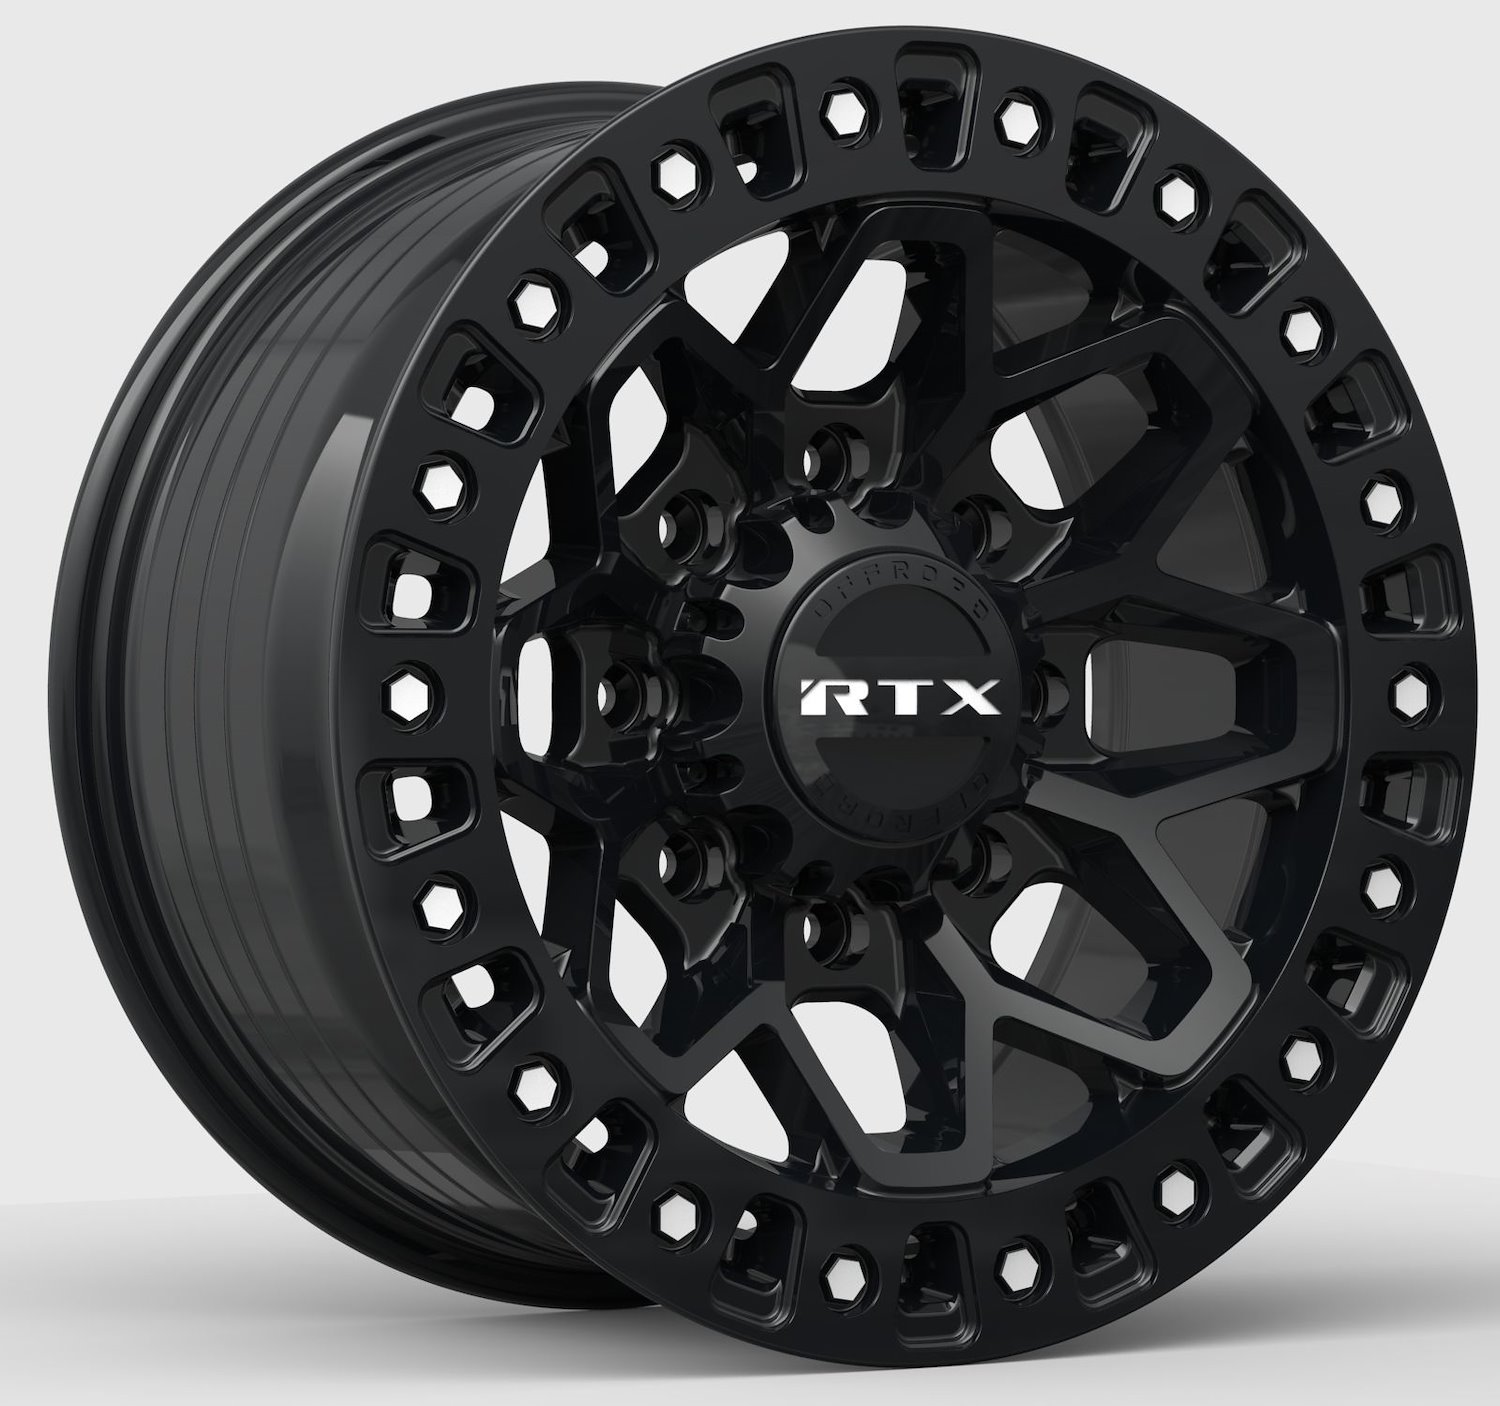 083189 Off-Road Series Zion Wheel [Size: 17" x 9"] Gloss Black Milled Rivets Finish